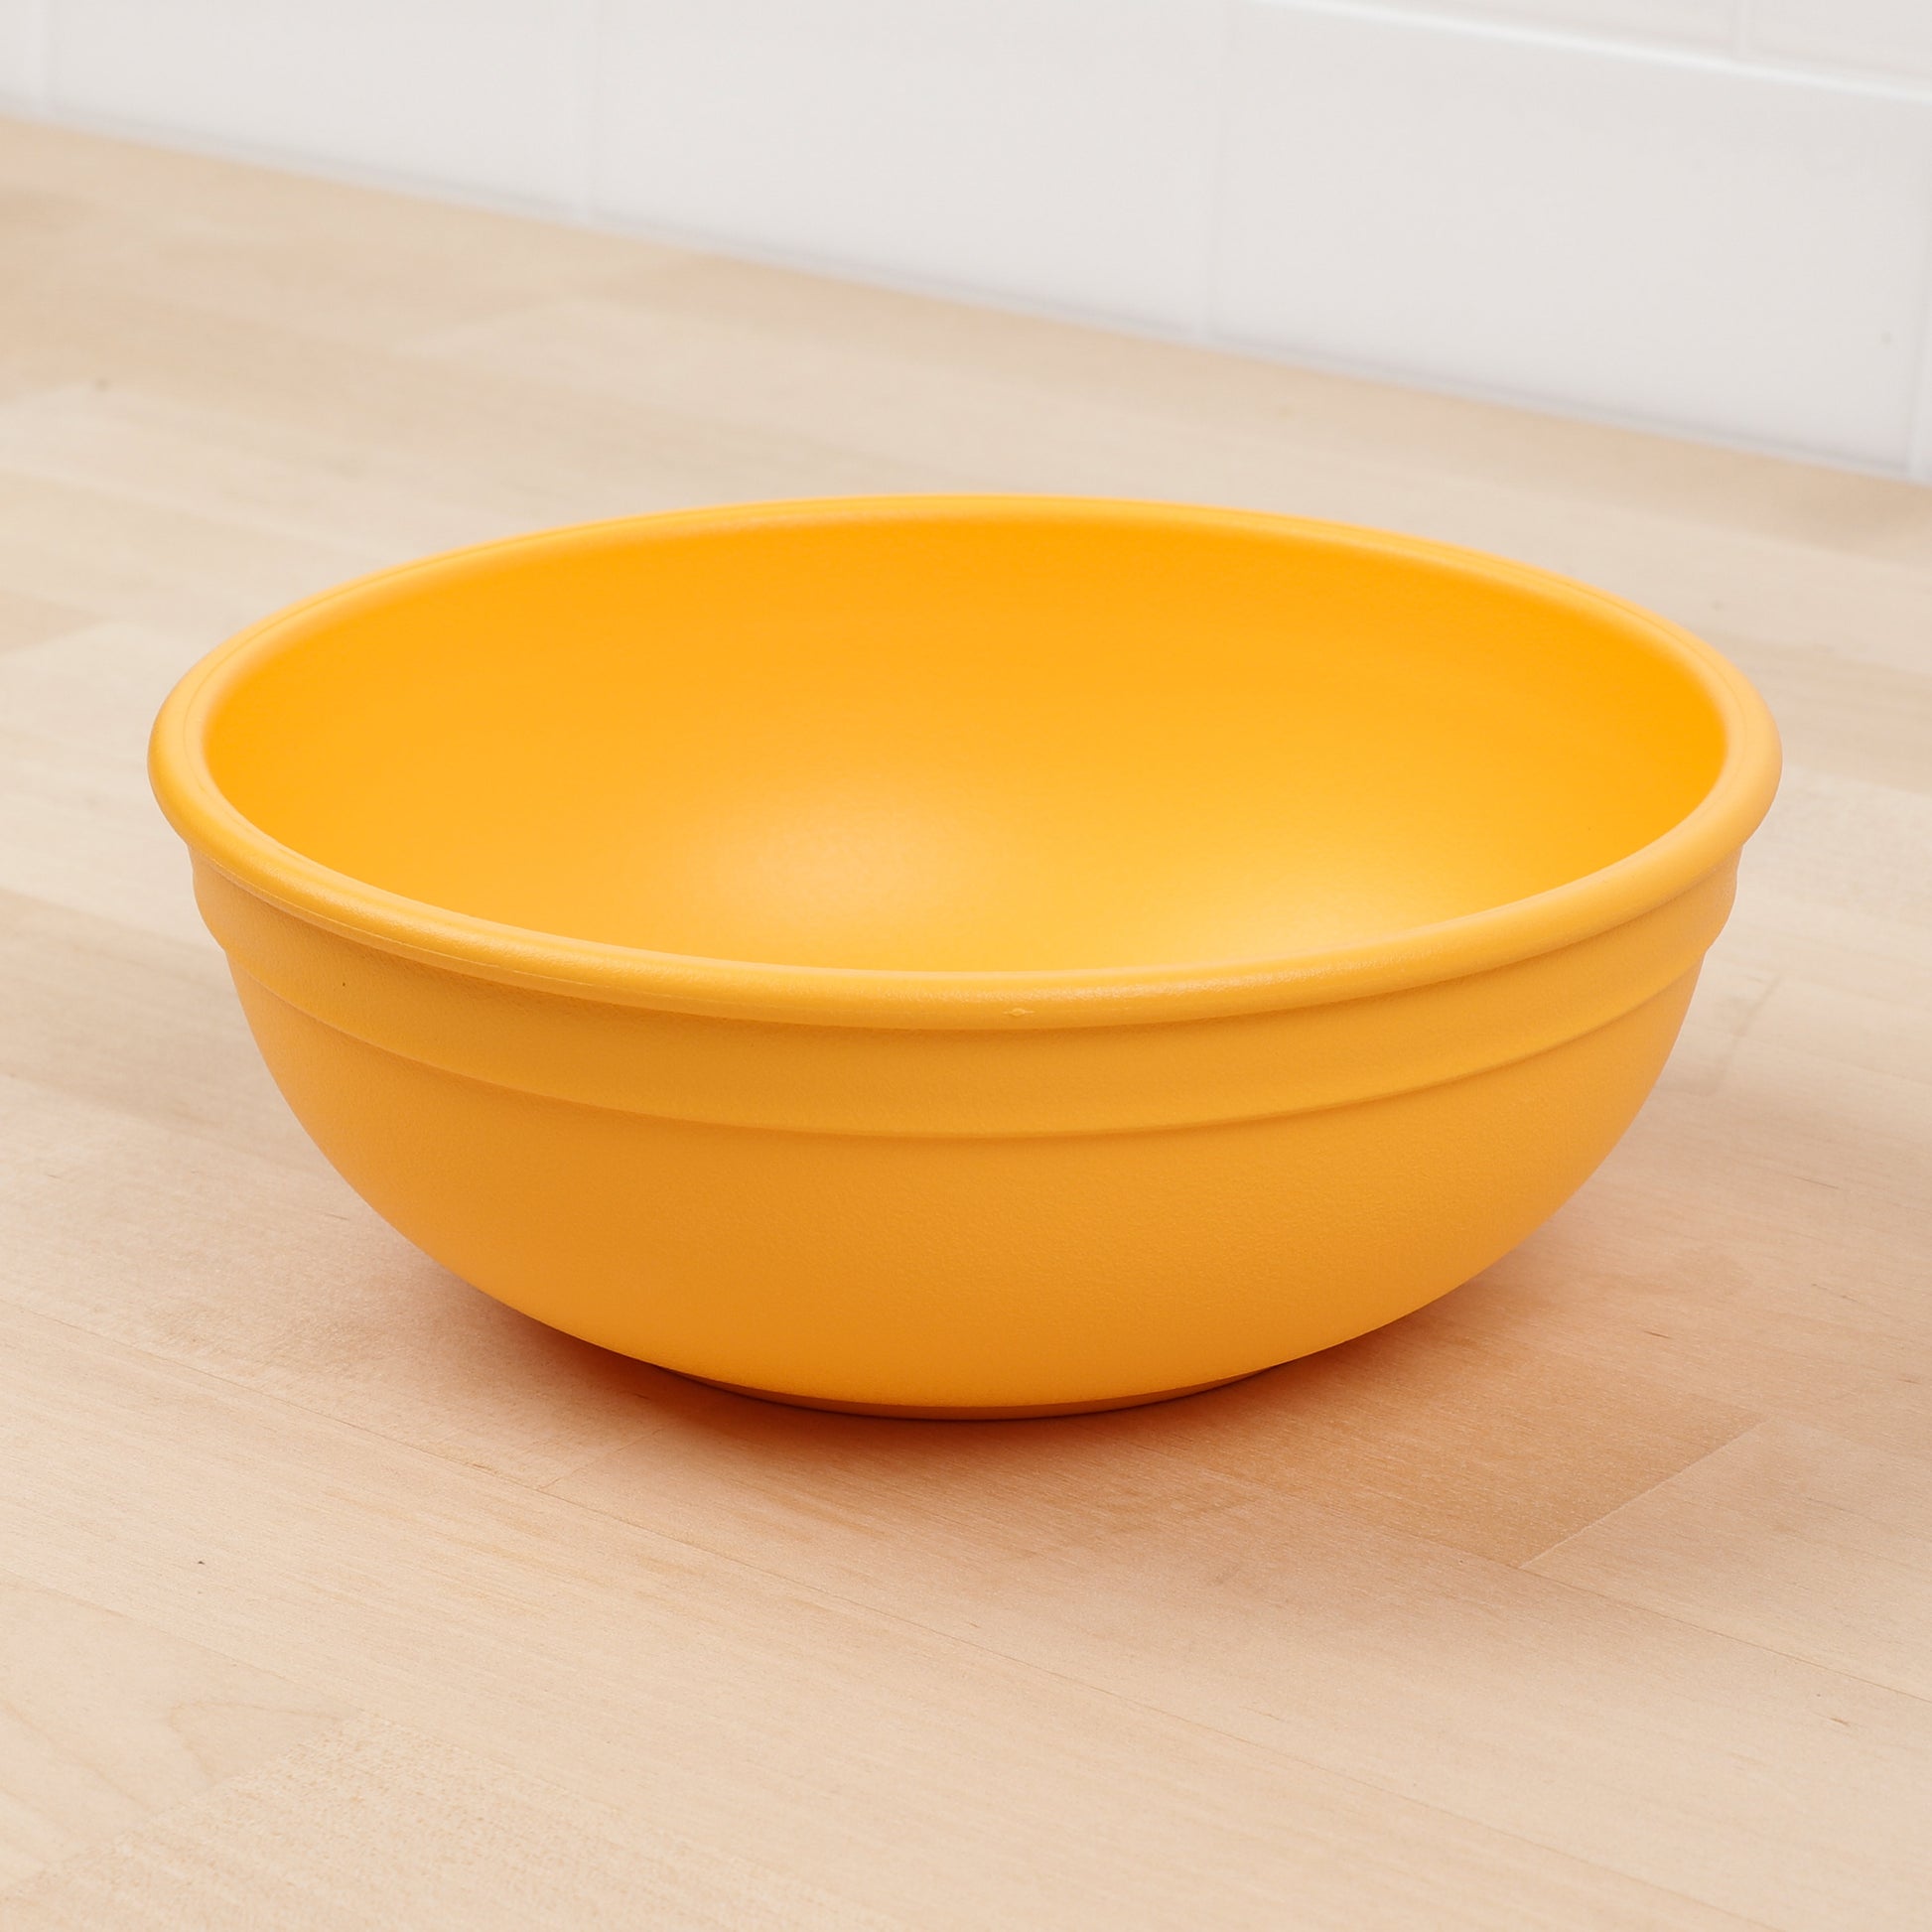 Re-Play Bowl | Sunny Yellow Large Size from Bear & Moo